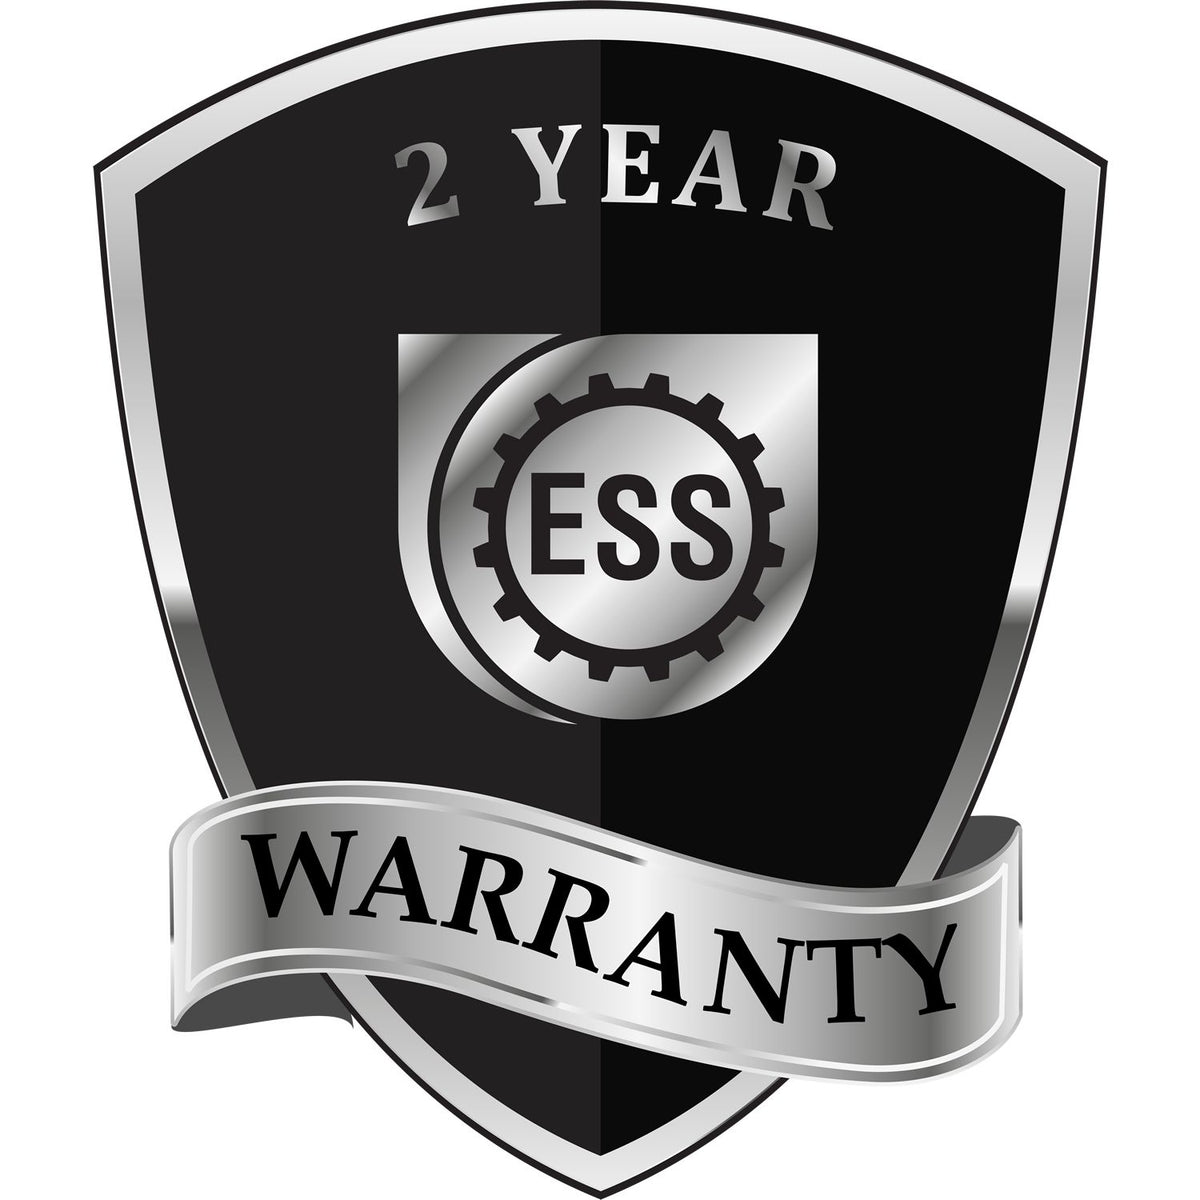 A badge or emblem showing a warranty icon for the Arizona Engineer Desk Seal